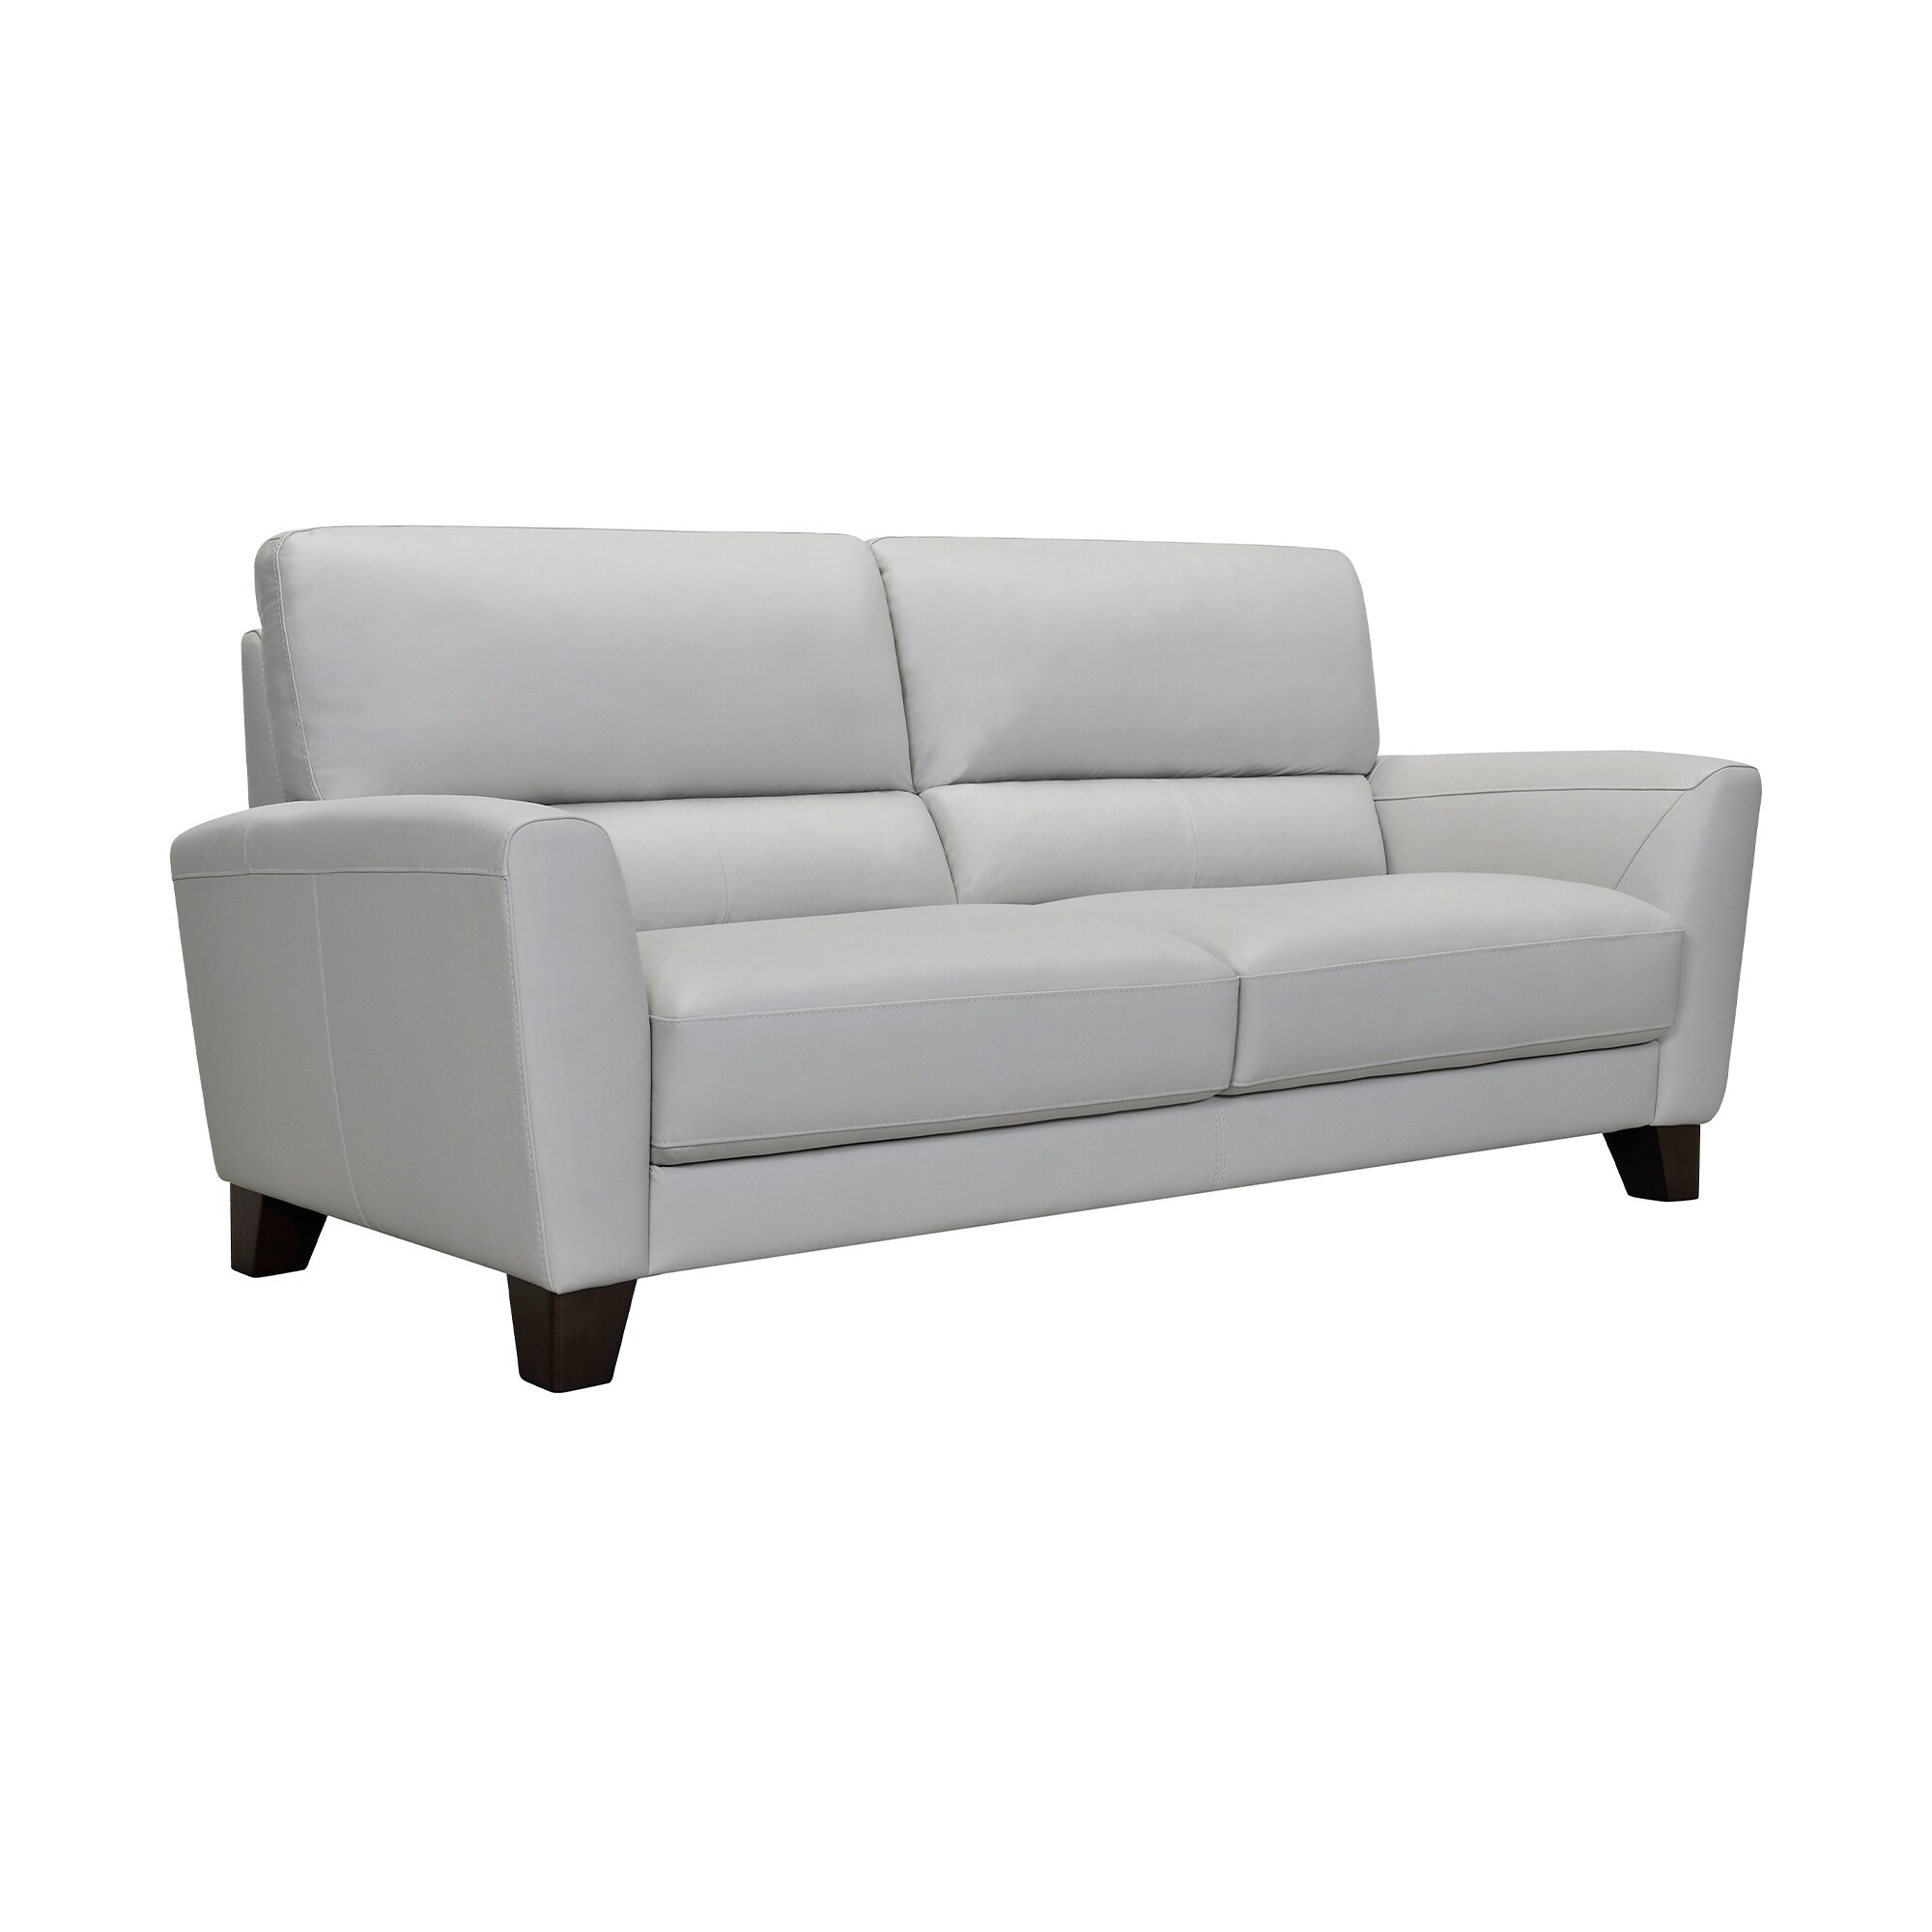 Sofa Genuine leather Couches, Sofas & Loveseats at Lowes.com